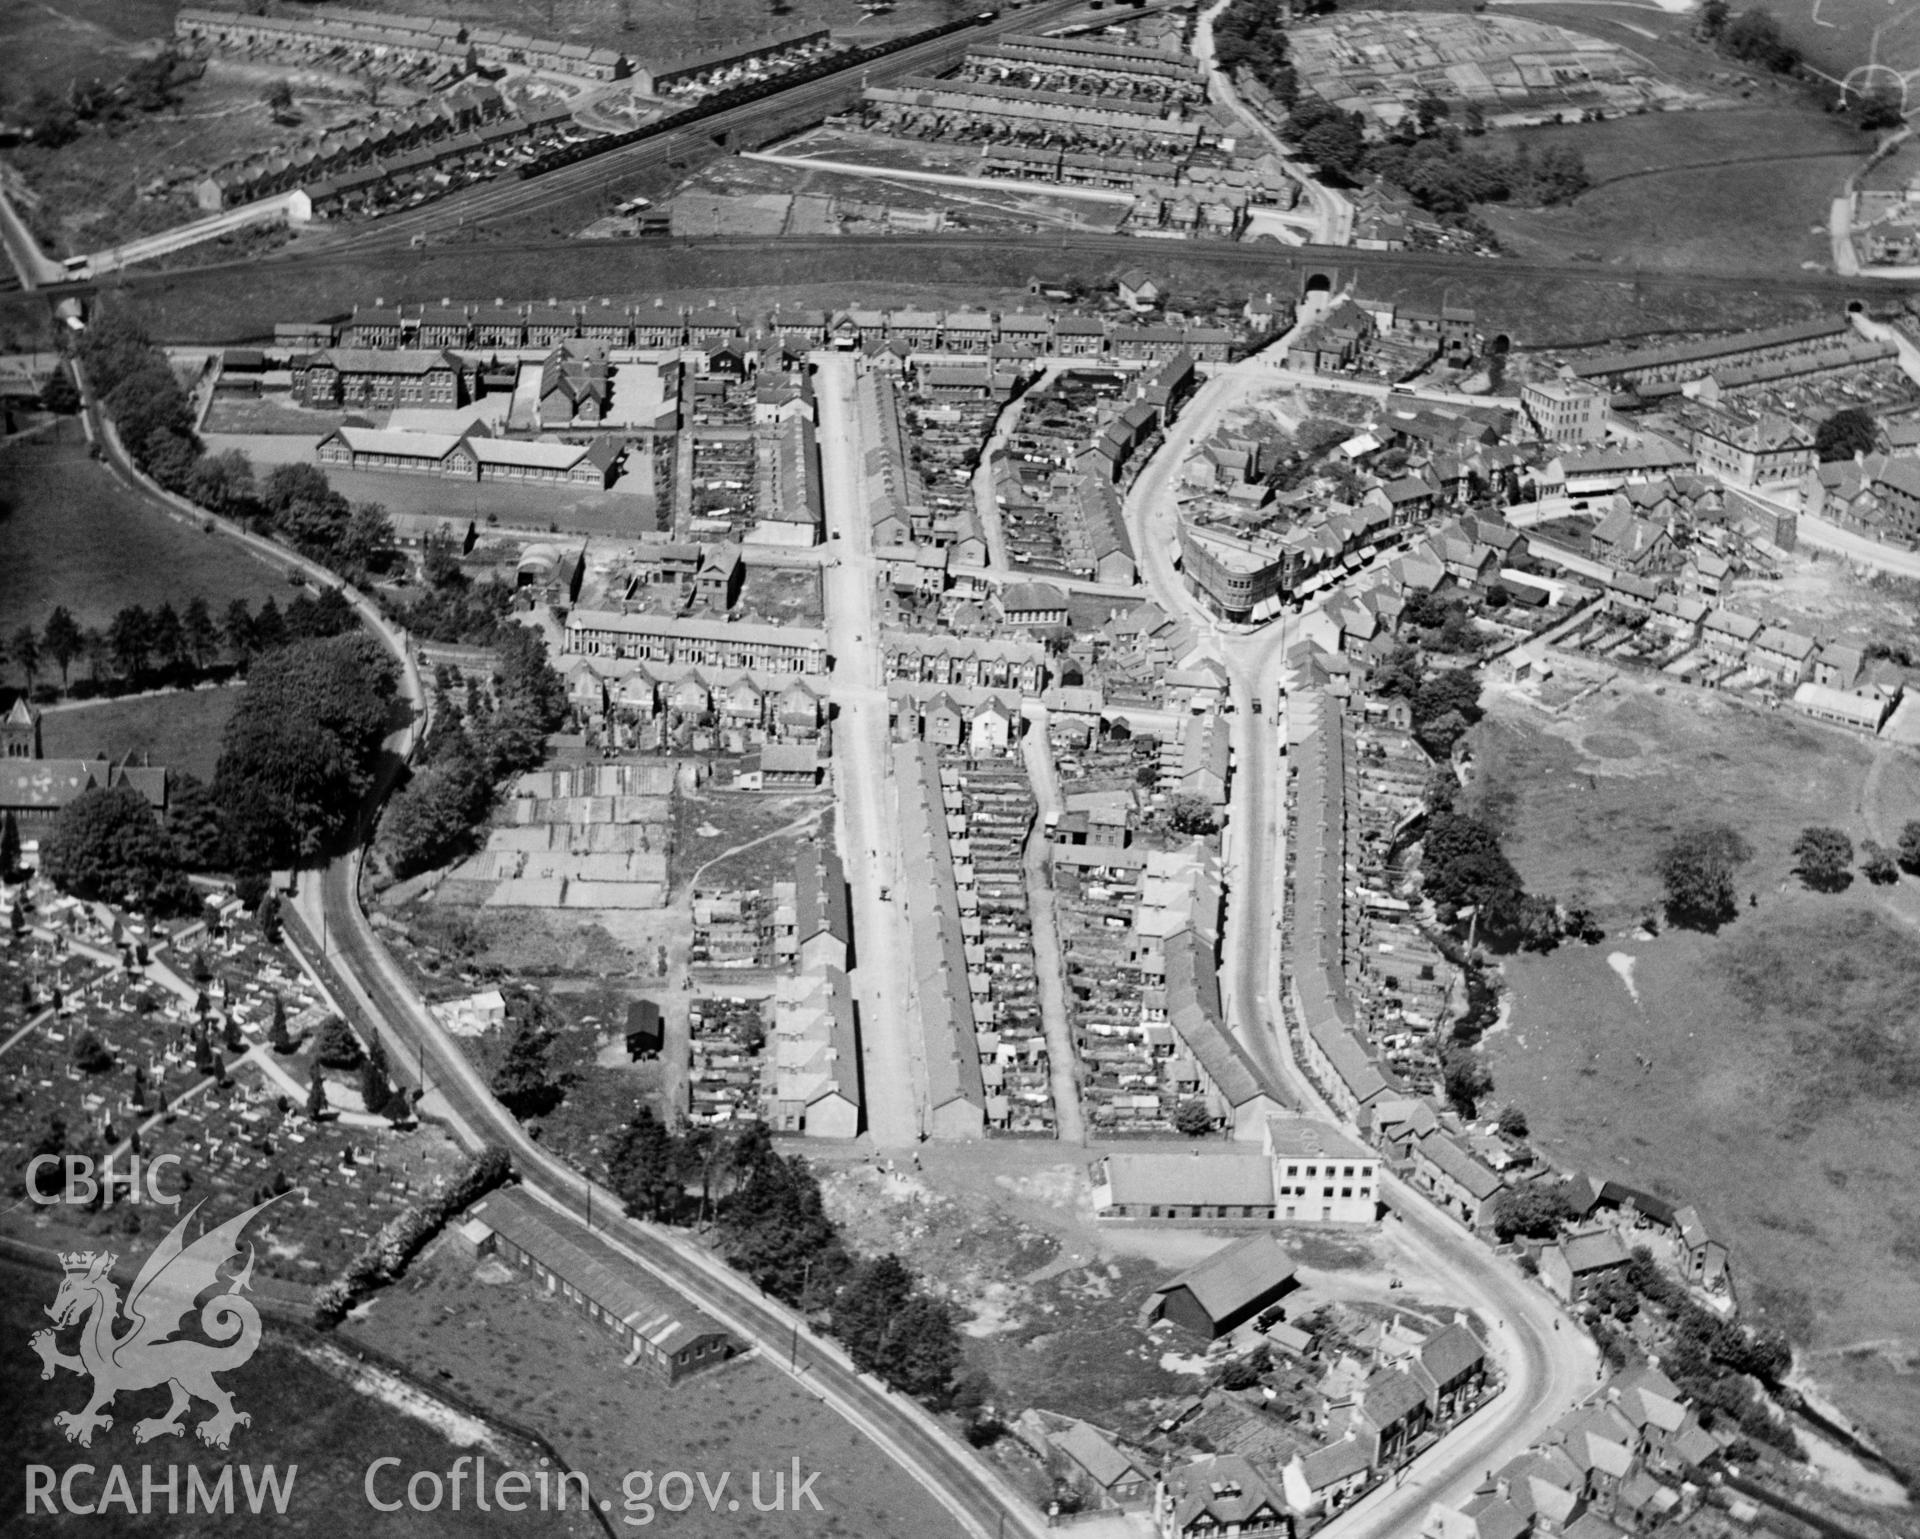 General view of Ystrad Mynach, oblique aerial view. 5?x4? black and white glass plate negative.